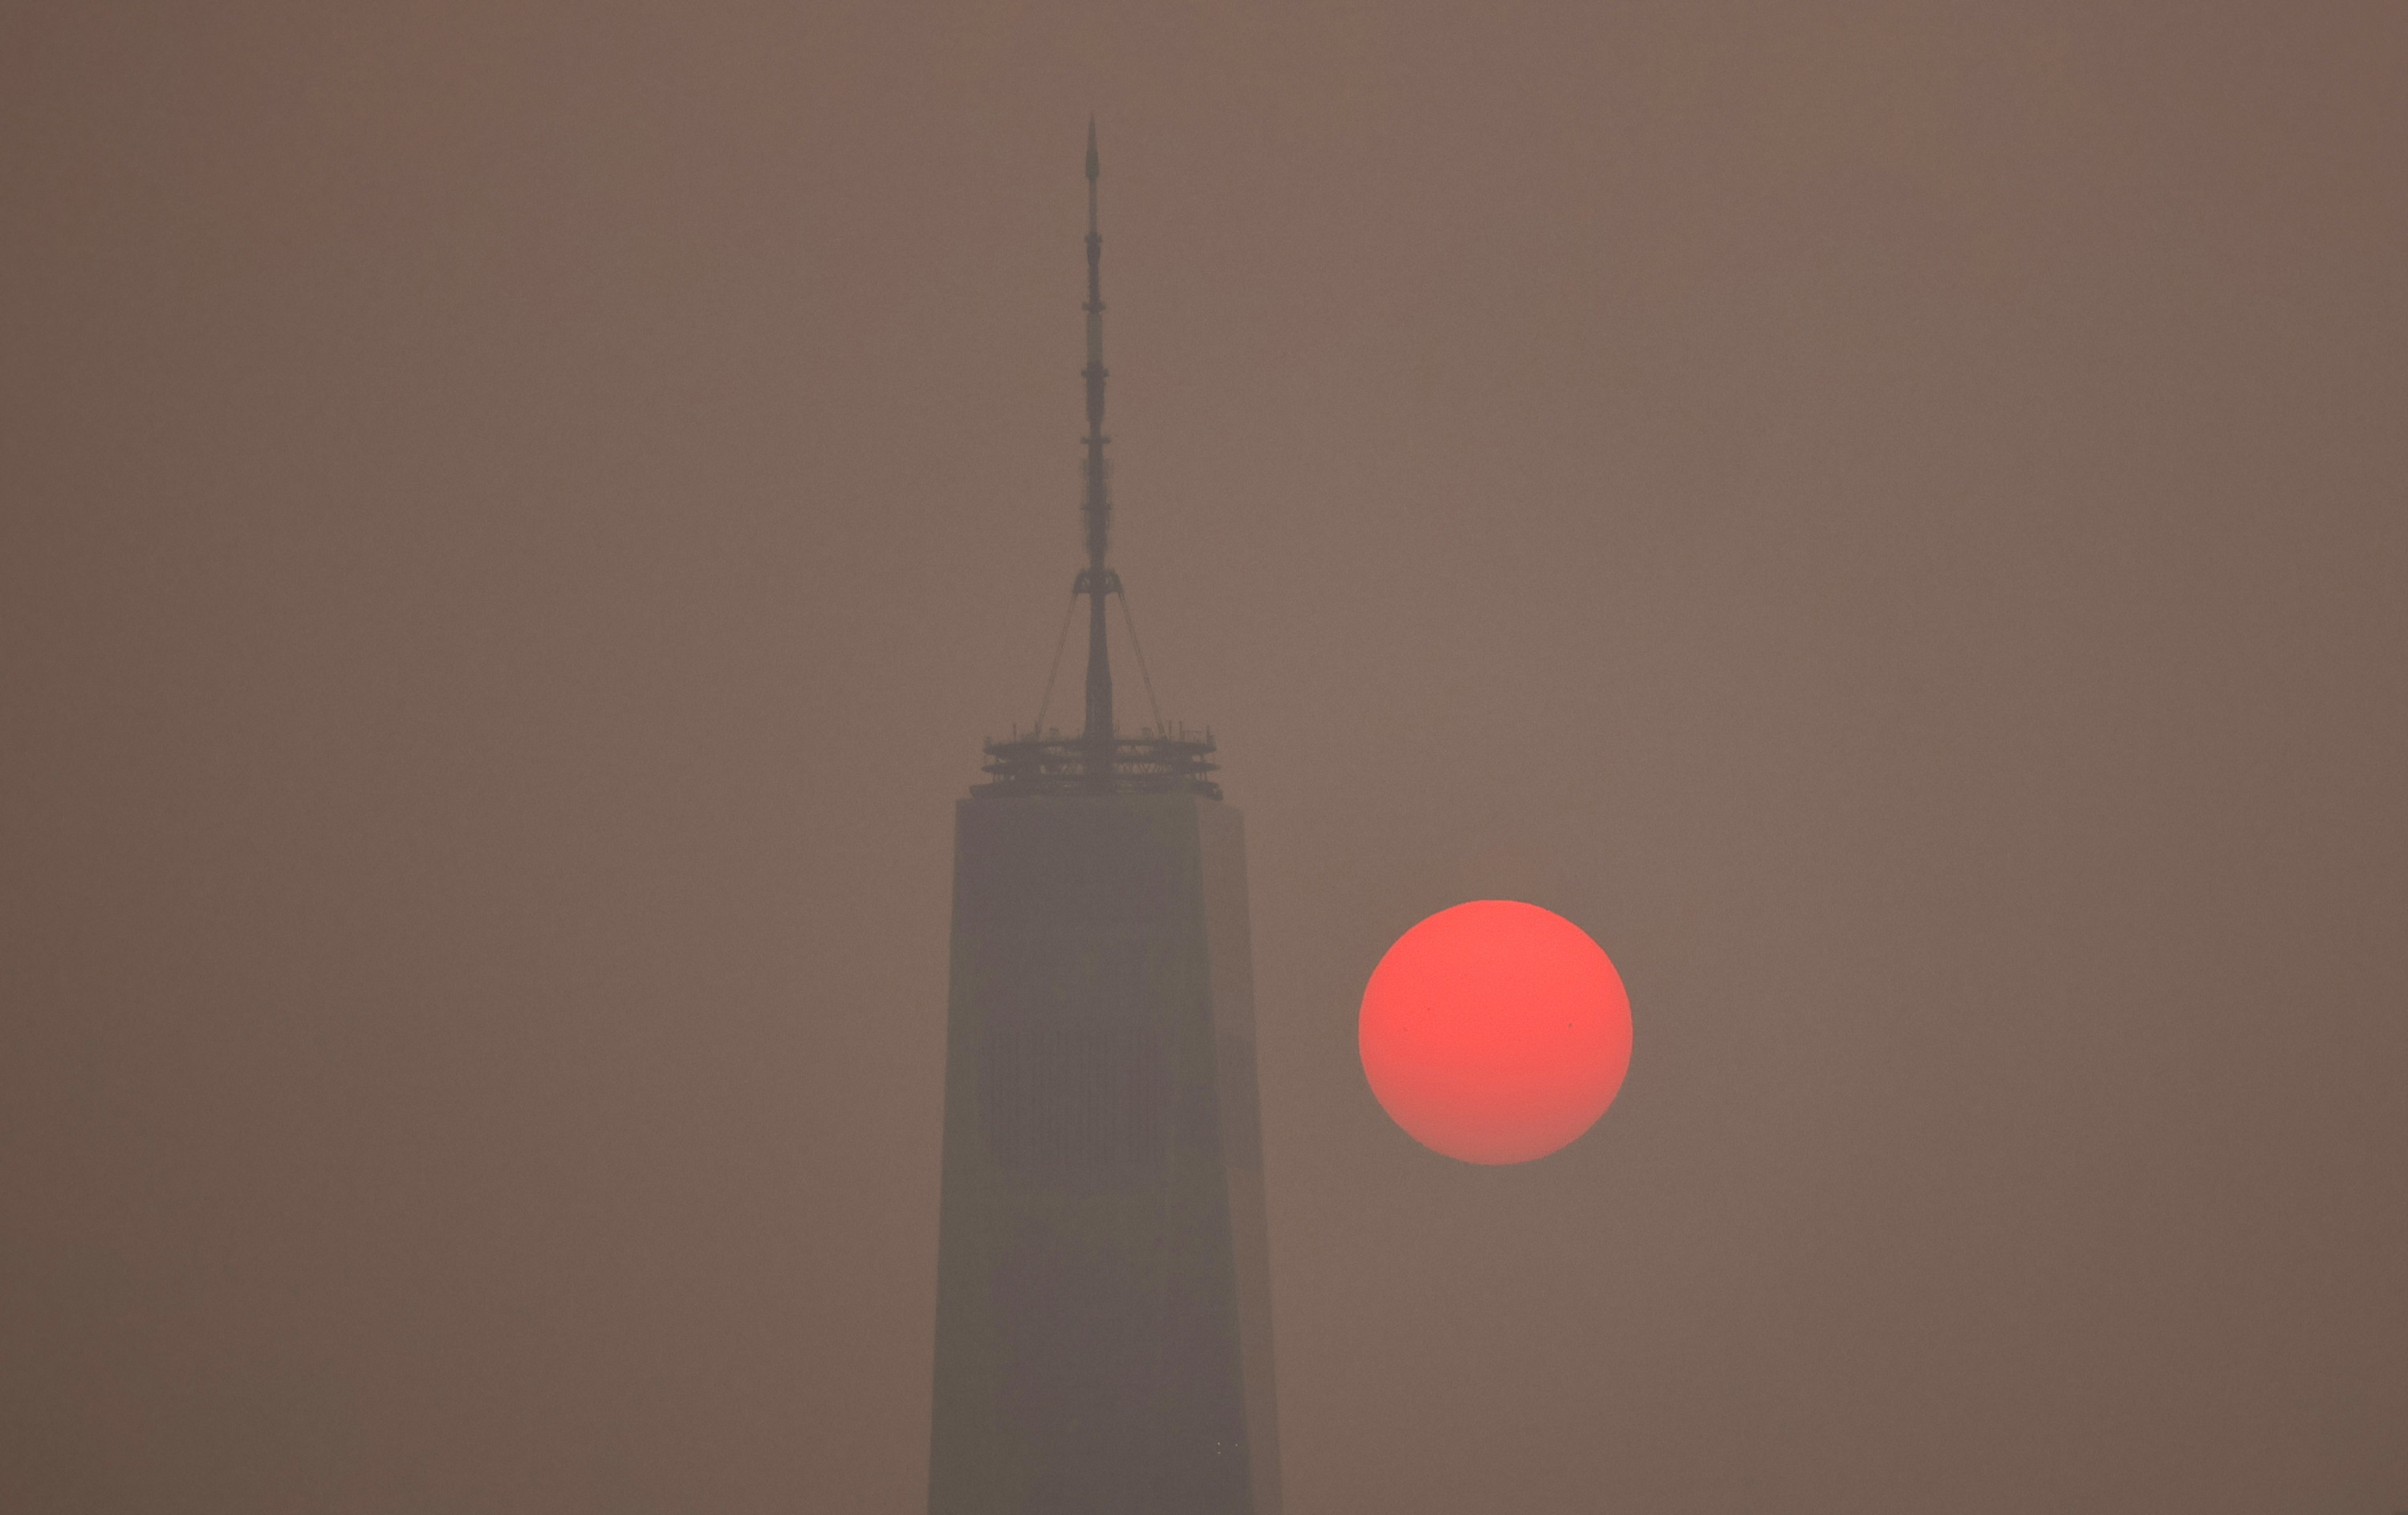 A close-up of the sun which looks neon orange-red due to the smoke